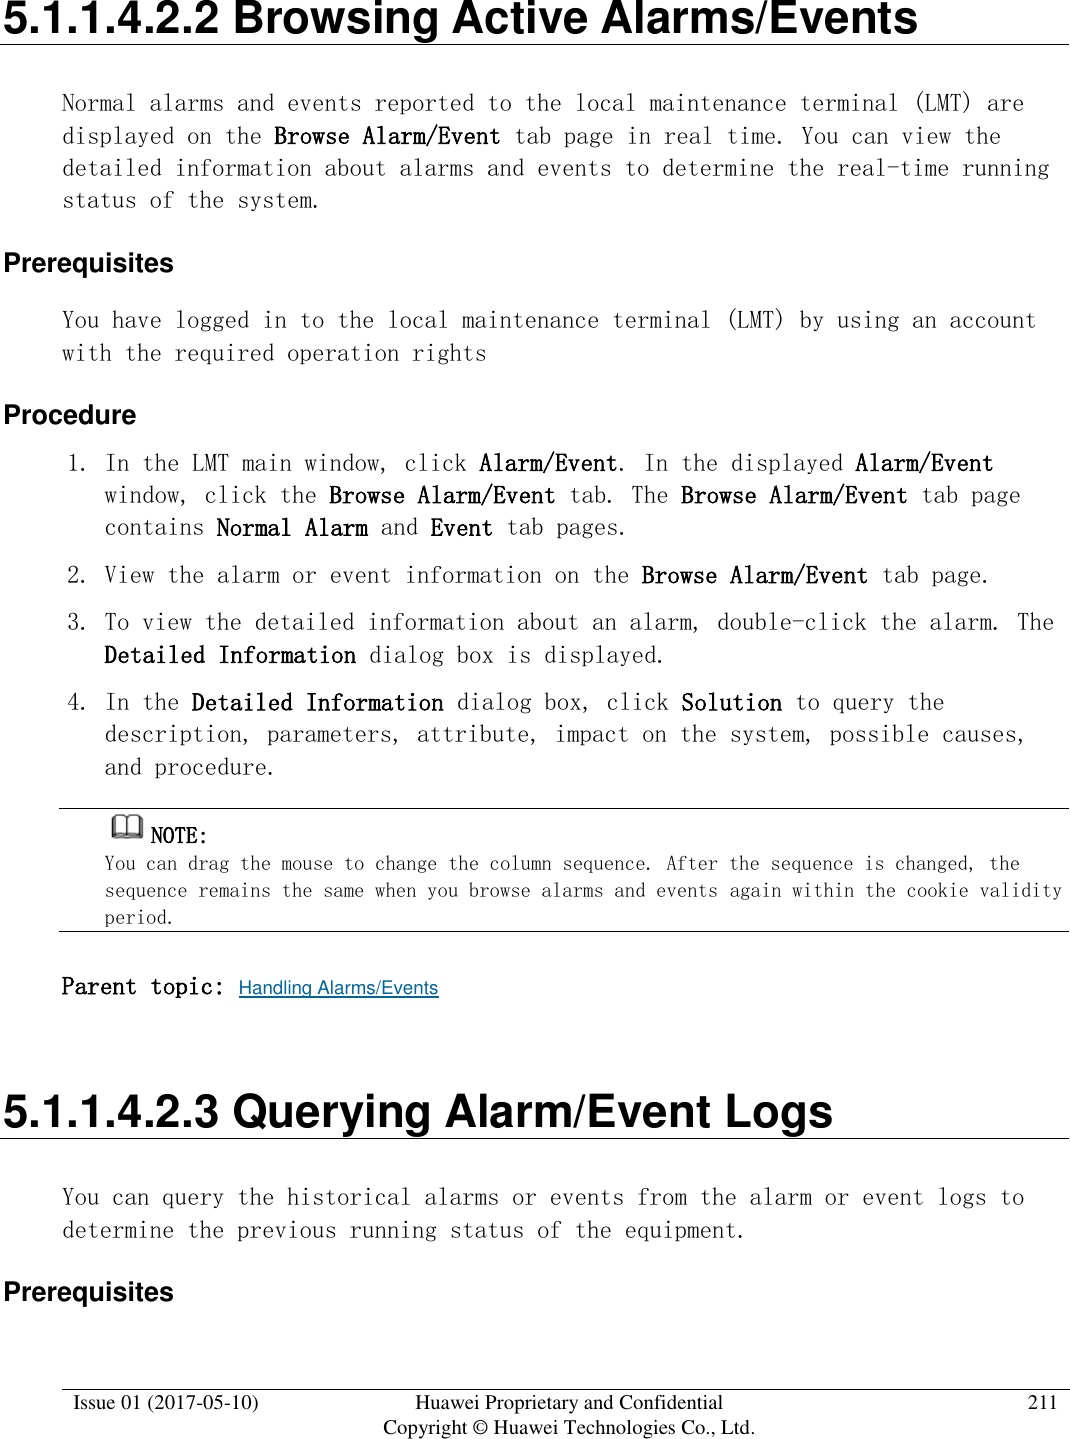  Issue 01 (2017-05-10) Huawei Proprietary and Confidential      Copyright © Huawei Technologies Co., Ltd. 211  5.1.1.4.2.2 Browsing Active Alarms/Events Normal alarms and events reported to the local maintenance terminal (LMT) are displayed on the Browse Alarm/Event tab page in real time. You can view the detailed information about alarms and events to determine the real-time running status of the system.  Prerequisites You have logged in to the local maintenance terminal (LMT) by using an account with the required operation rights Procedure 1. In the LMT main window, click Alarm/Event. In the displayed Alarm/Event window, click the Browse Alarm/Event tab. The Browse Alarm/Event tab page contains Normal Alarm and Event tab pages. 2. View the alarm or event information on the Browse Alarm/Event tab page. 3. To view the detailed information about an alarm, double-click the alarm. The Detailed Information dialog box is displayed.  4. In the Detailed Information dialog box, click Solution to query the description, parameters, attribute, impact on the system, possible causes, and procedure.  NOTE:  You can drag the mouse to change the column sequence. After the sequence is changed, the sequence remains the same when you browse alarms and events again within the cookie validity period. Parent topic: Handling Alarms/Events 5.1.1.4.2.3 Querying Alarm/Event Logs You can query the historical alarms or events from the alarm or event logs to determine the previous running status of the equipment.  Prerequisites 